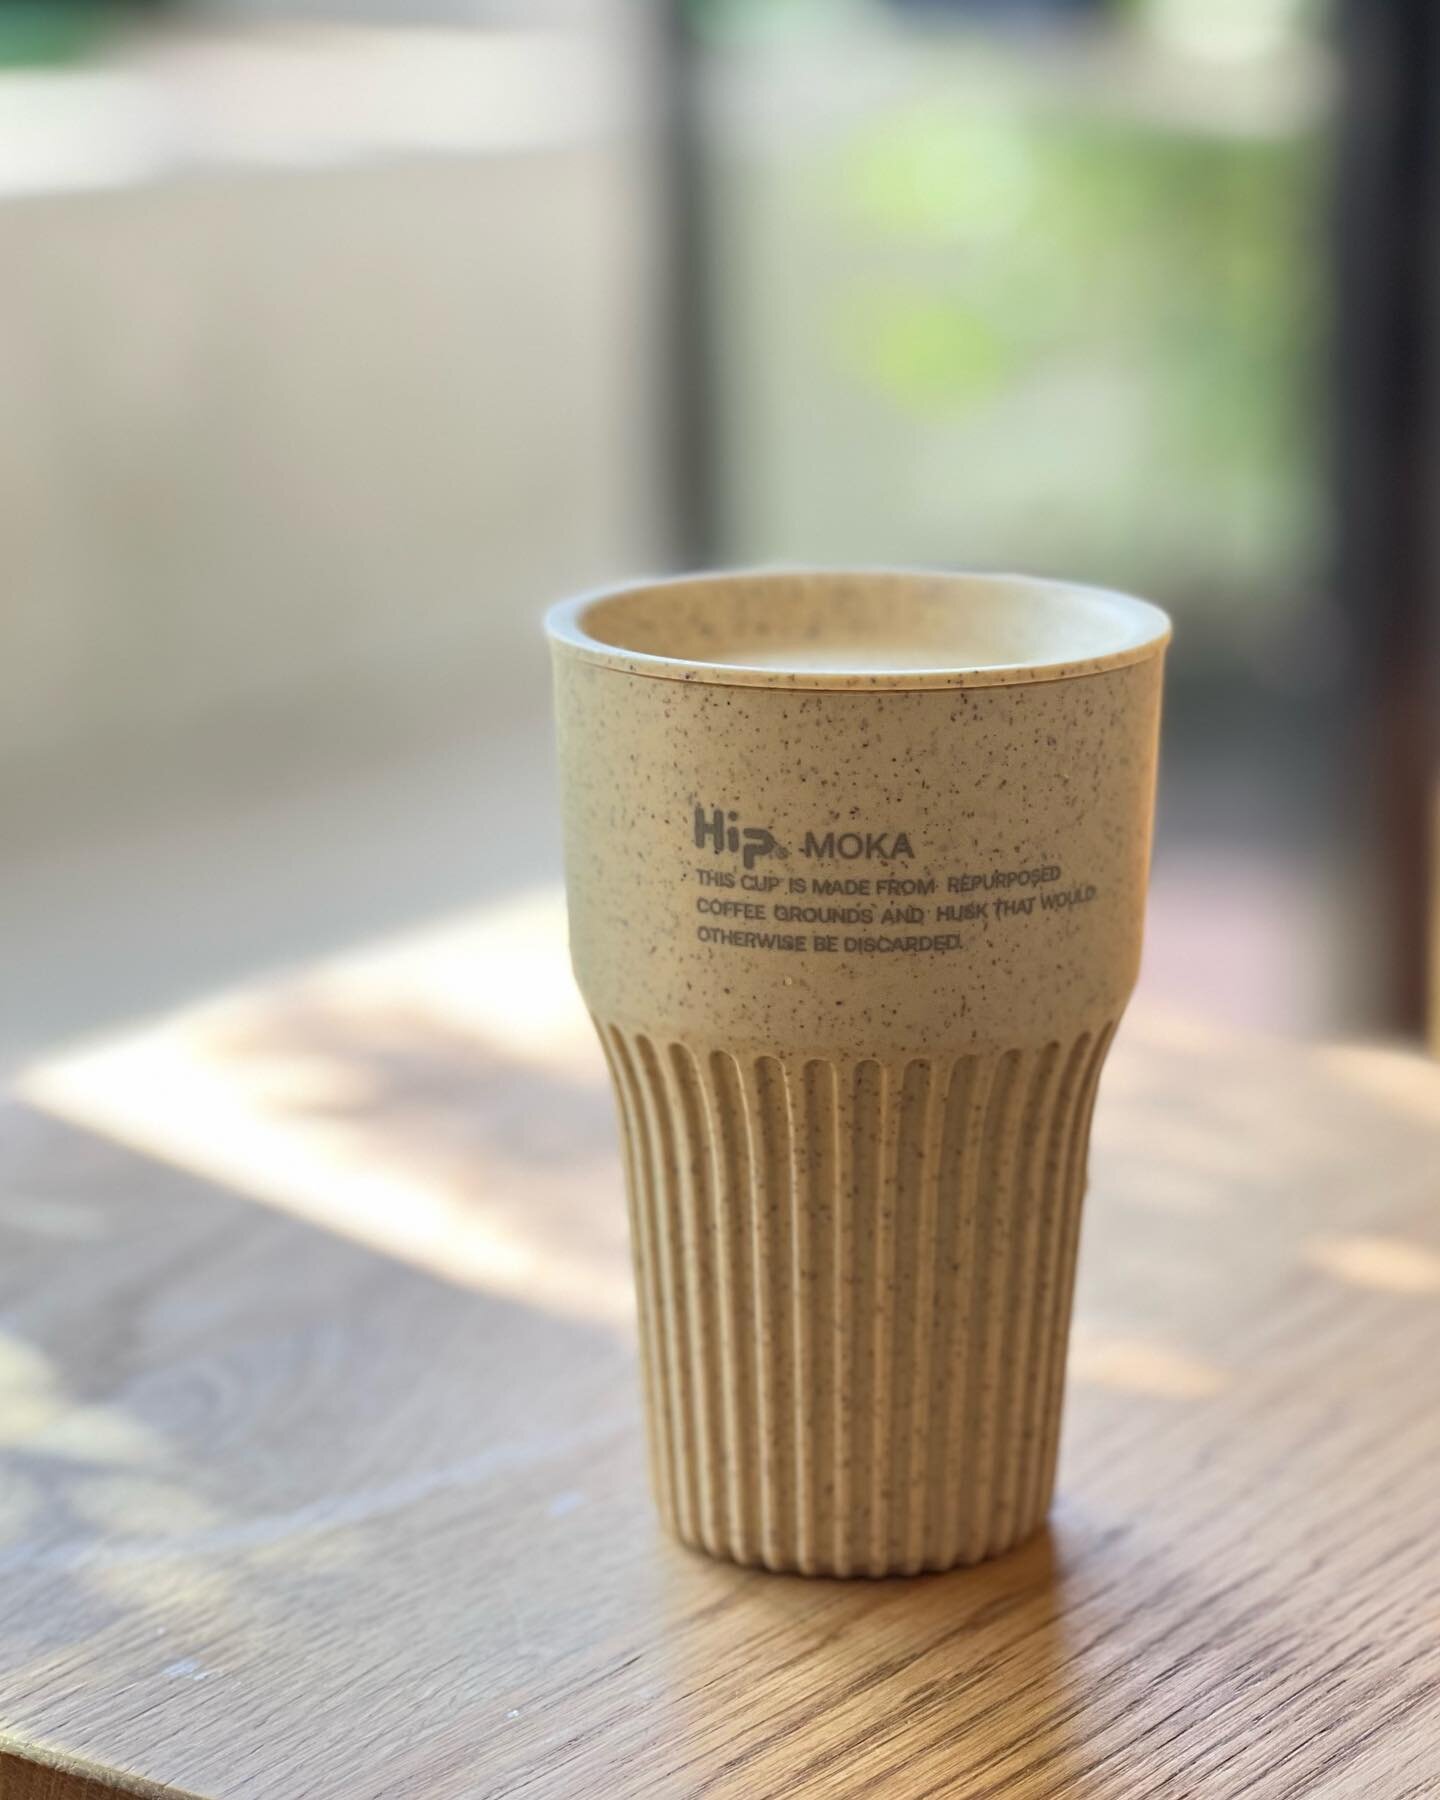 Back in stock 📦

Our Nomad branded cups from Hip were a huge hit when they first dropped, and now they&rsquo;re back!

Made from repurposed coffee grounds and husks, this BPA free, heat resistant cup is 12oz making it perfect for your morning latte!